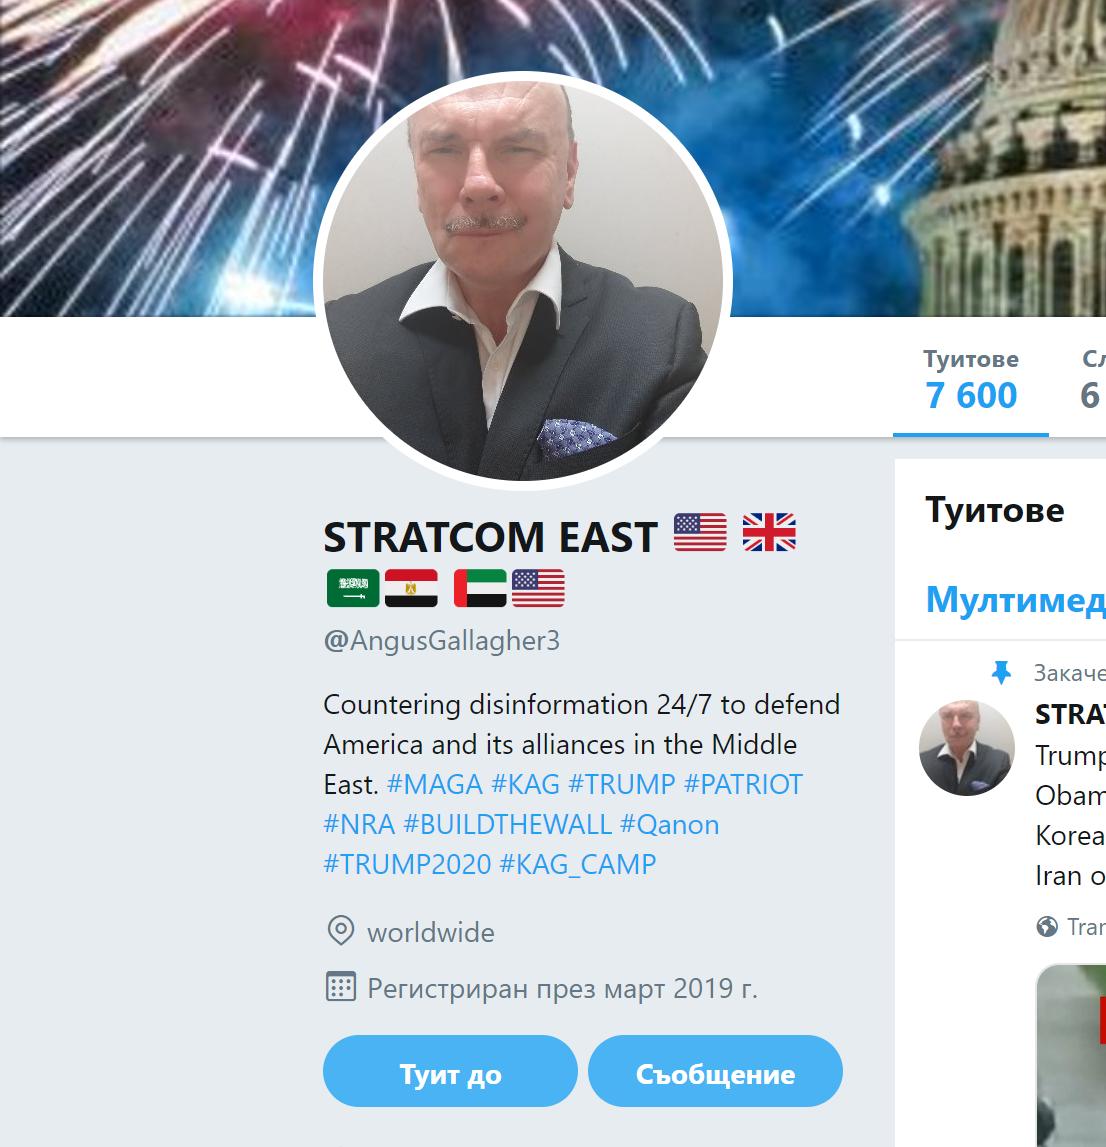 Indeed, his account had become like one of those many trolls accounts that spread  #MAGA propaganda. Just look at all those hashtags in the bio.  #MAGA  #KAG  #BUILDTHEWALL. It's a smorgasbord of on message campaign hashtags. And look at the ME flags too!